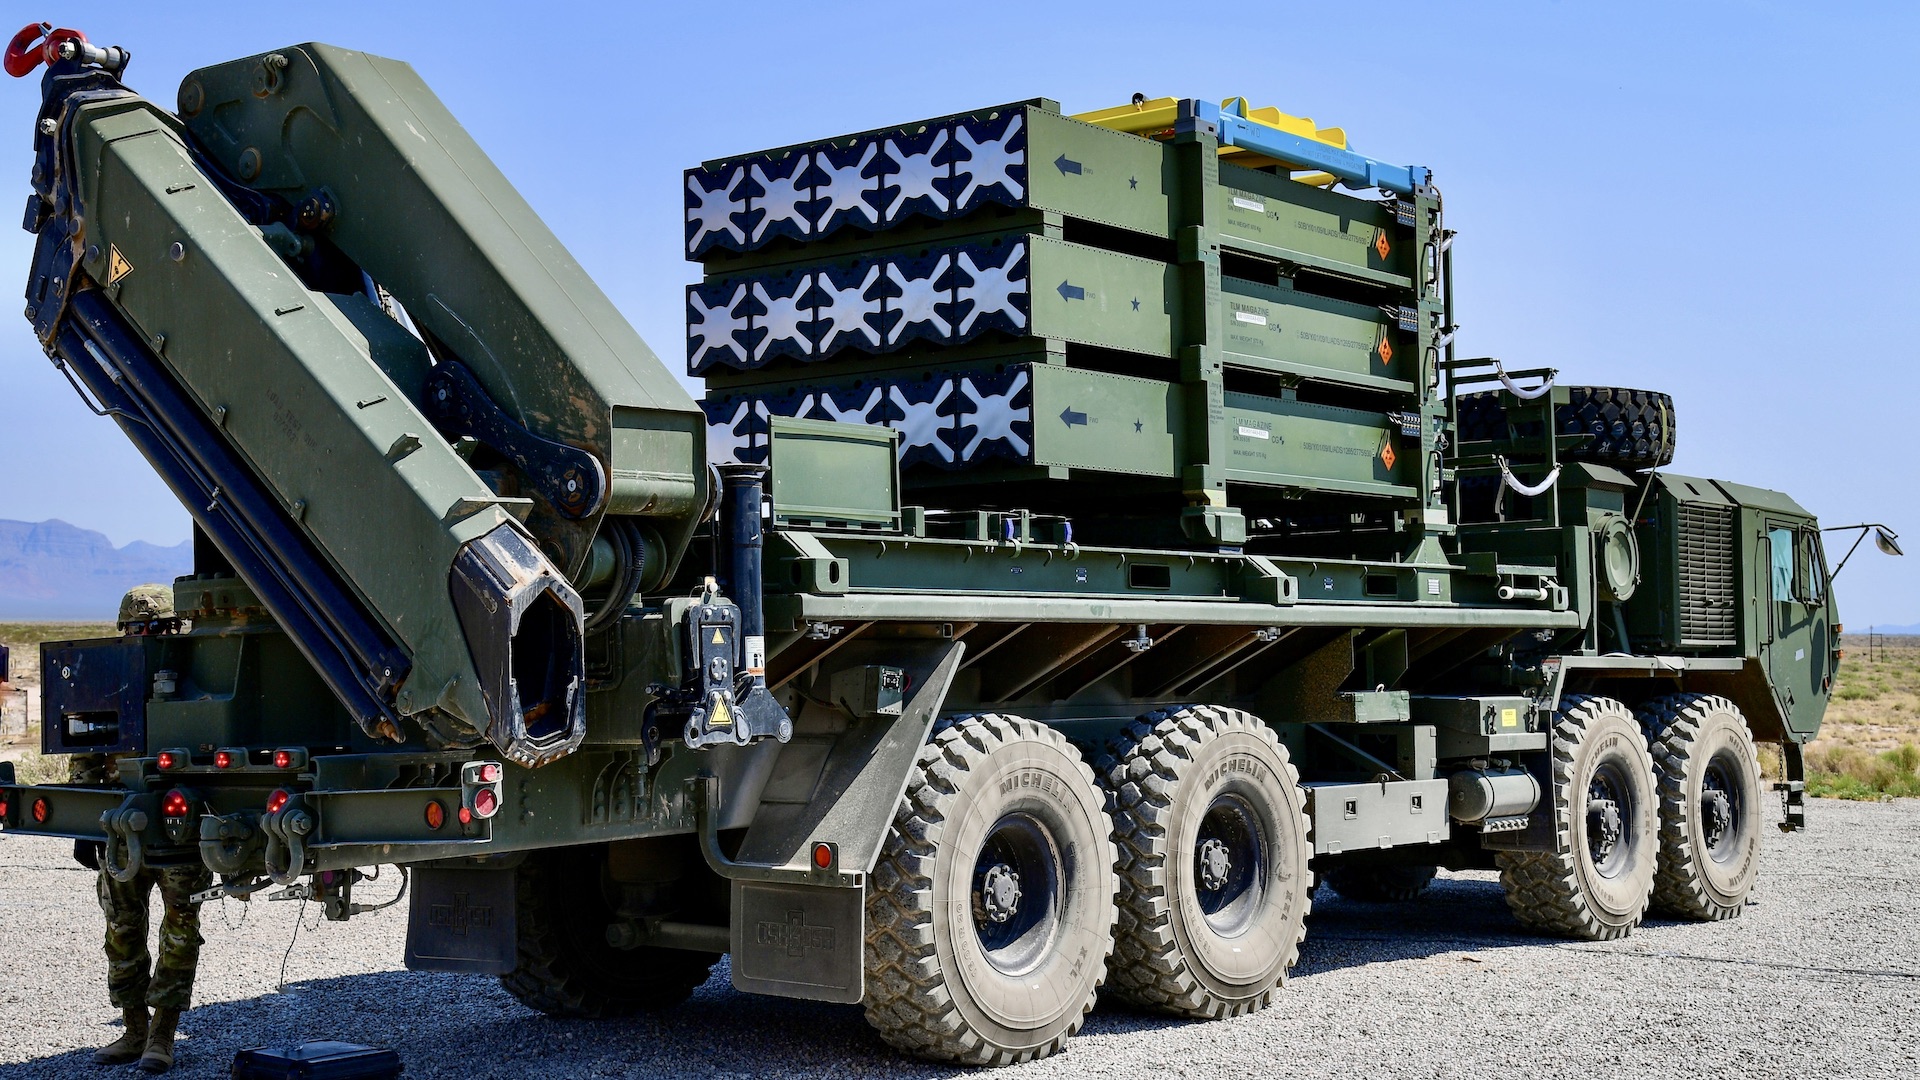 U.S. Army To Give Its Only Two Iron Dome Batteries To Israel: Reports